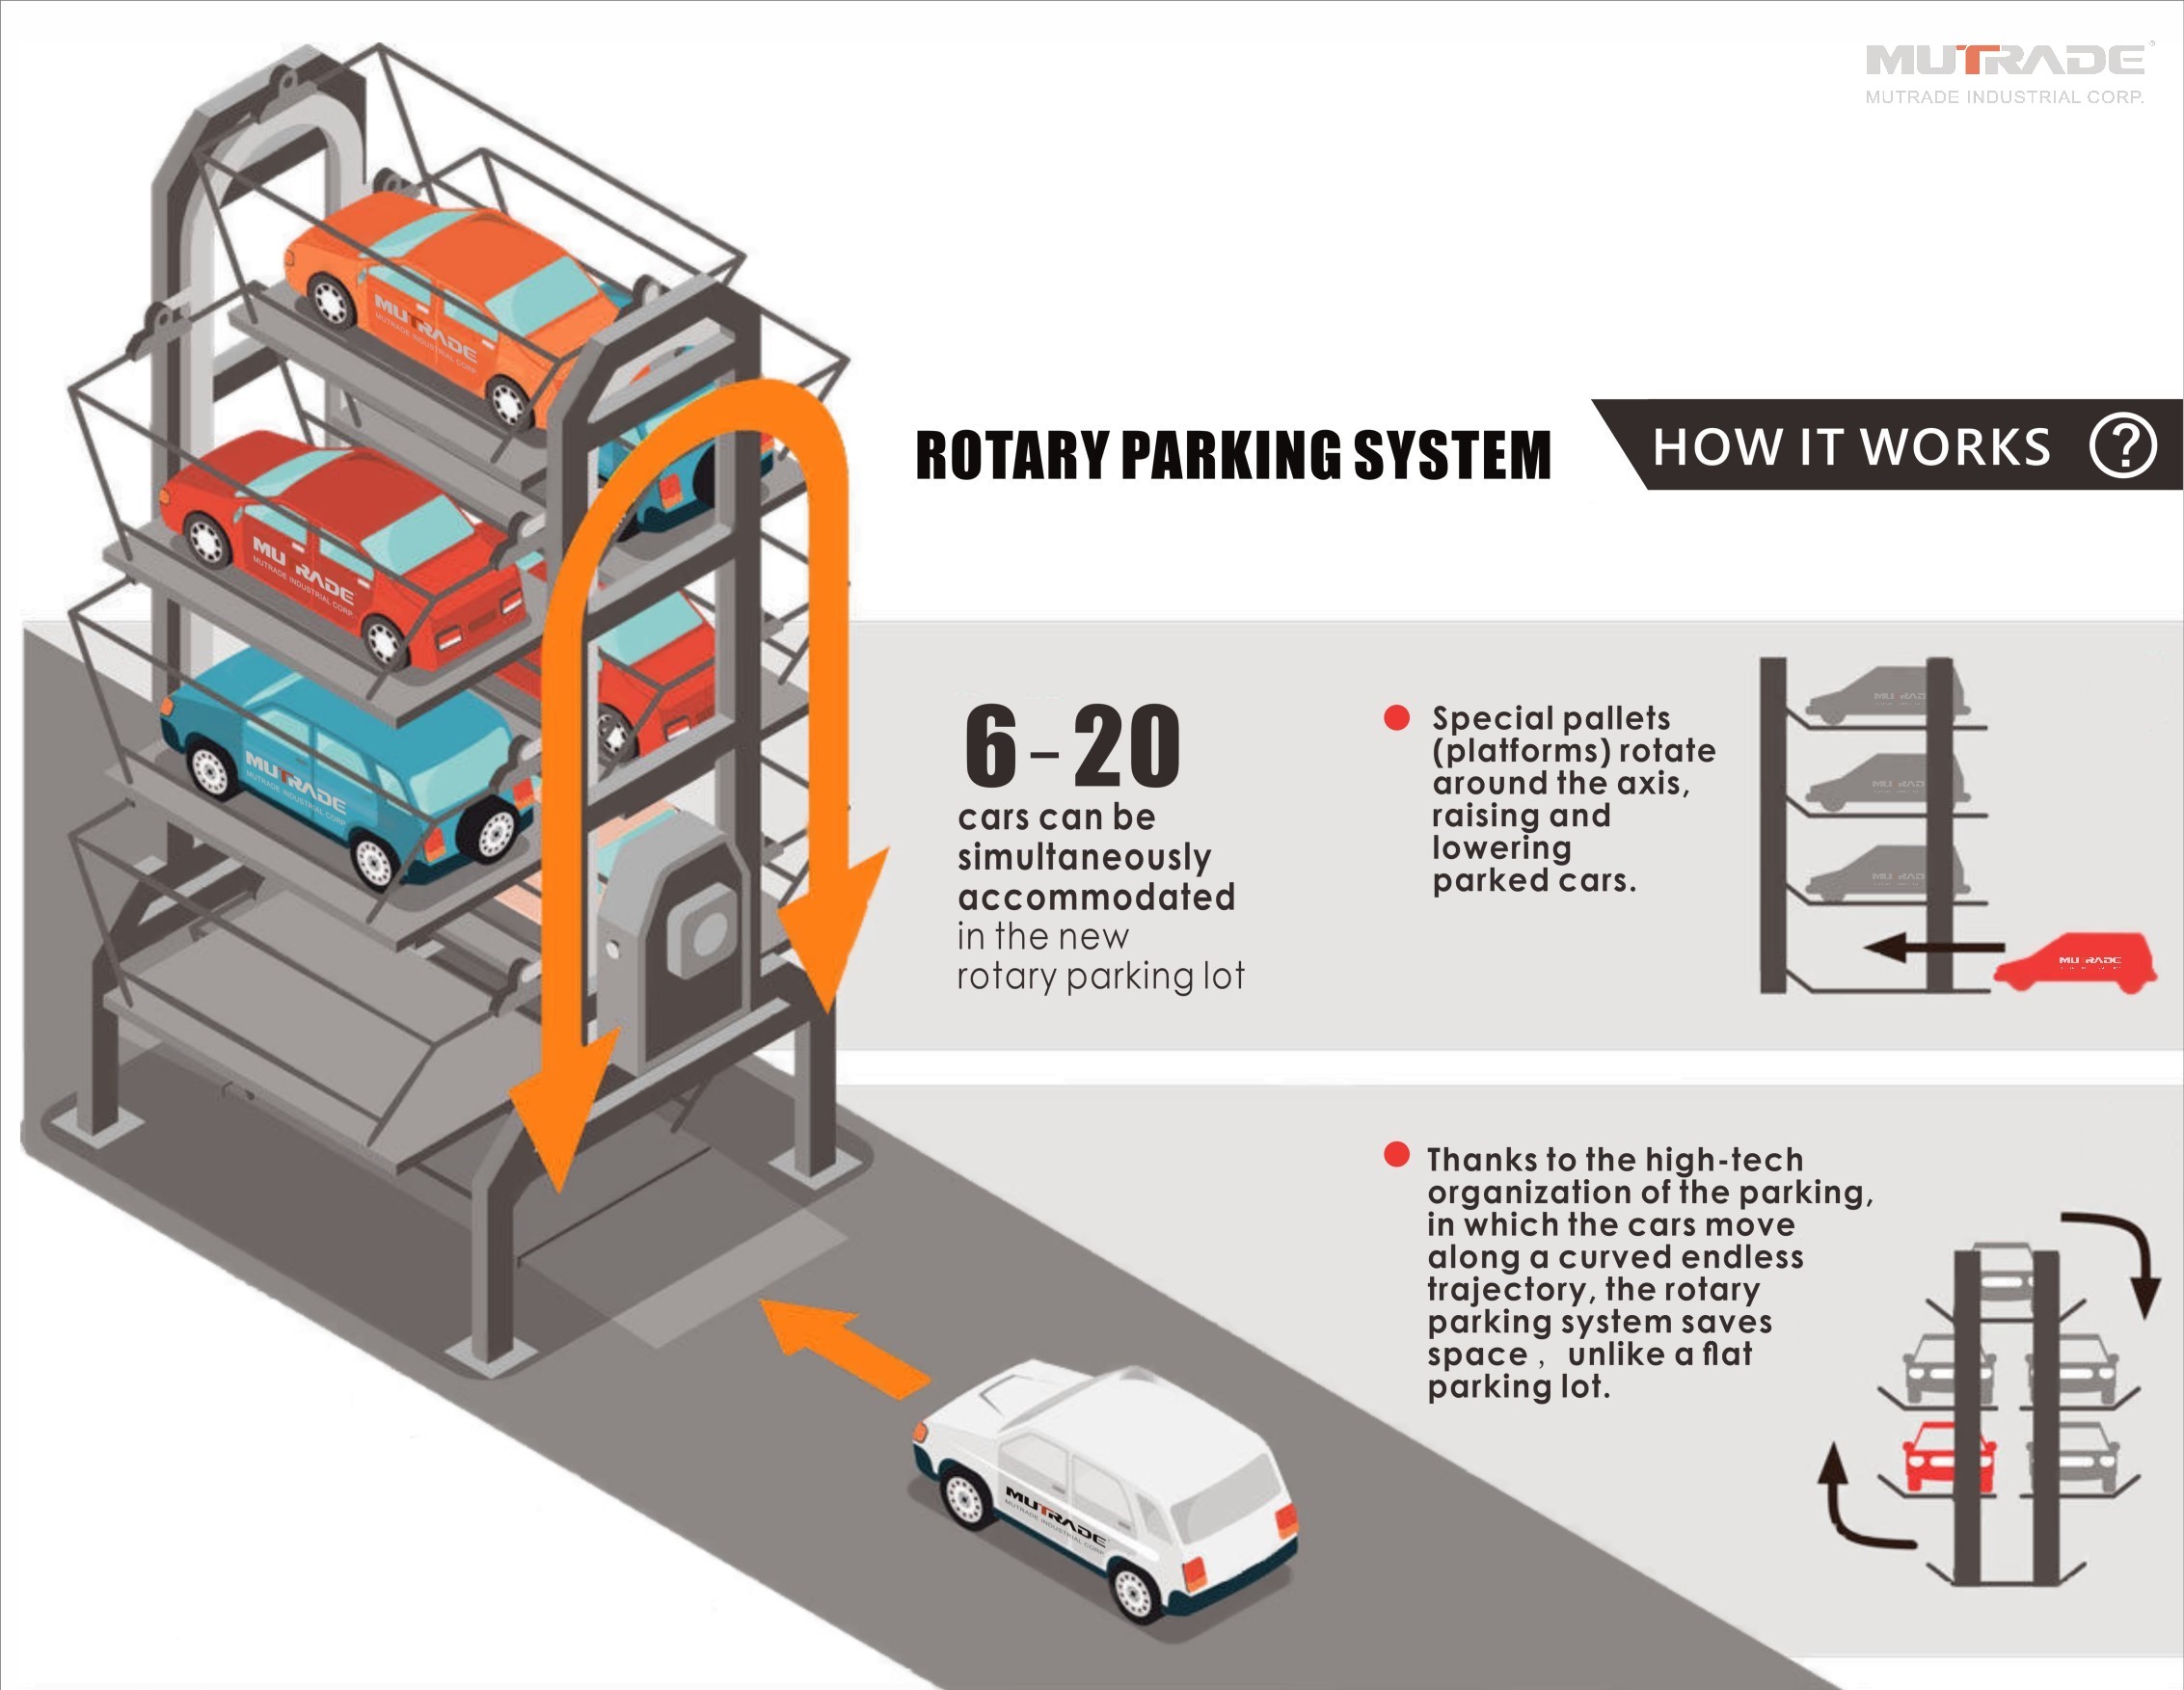 I-ARP rotary parking system automated parking principle china mutrade